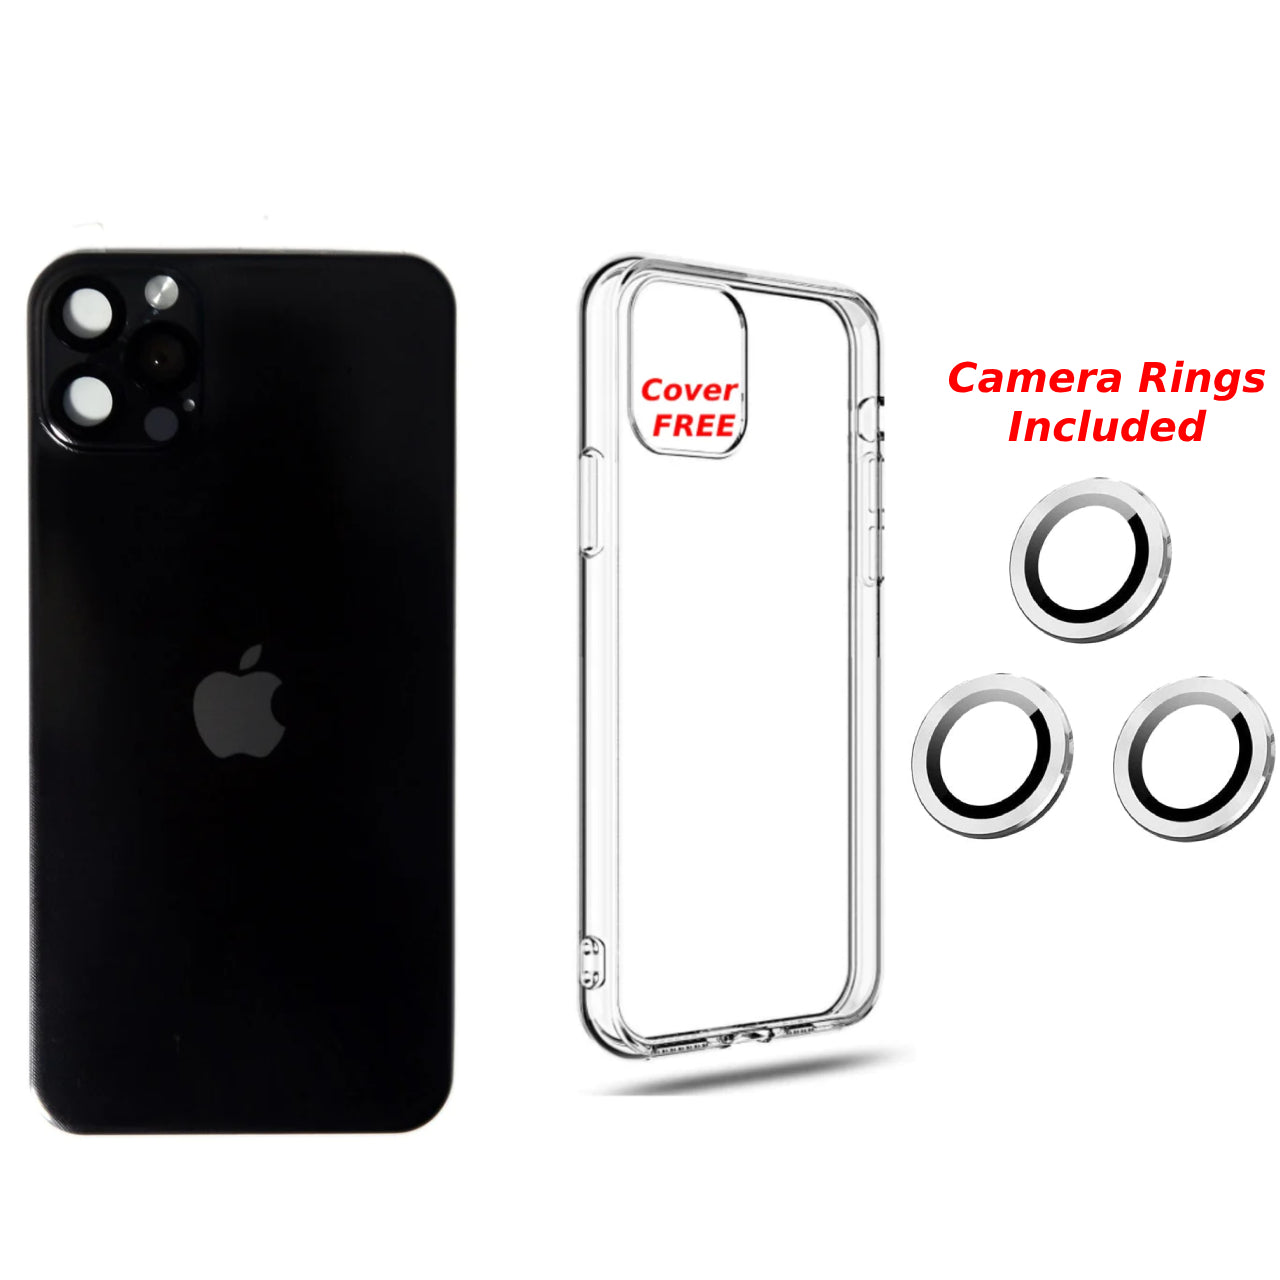 iPhone 11 to iPhone 13 Pro Converter - (Free Cover Included) and Camera Rings